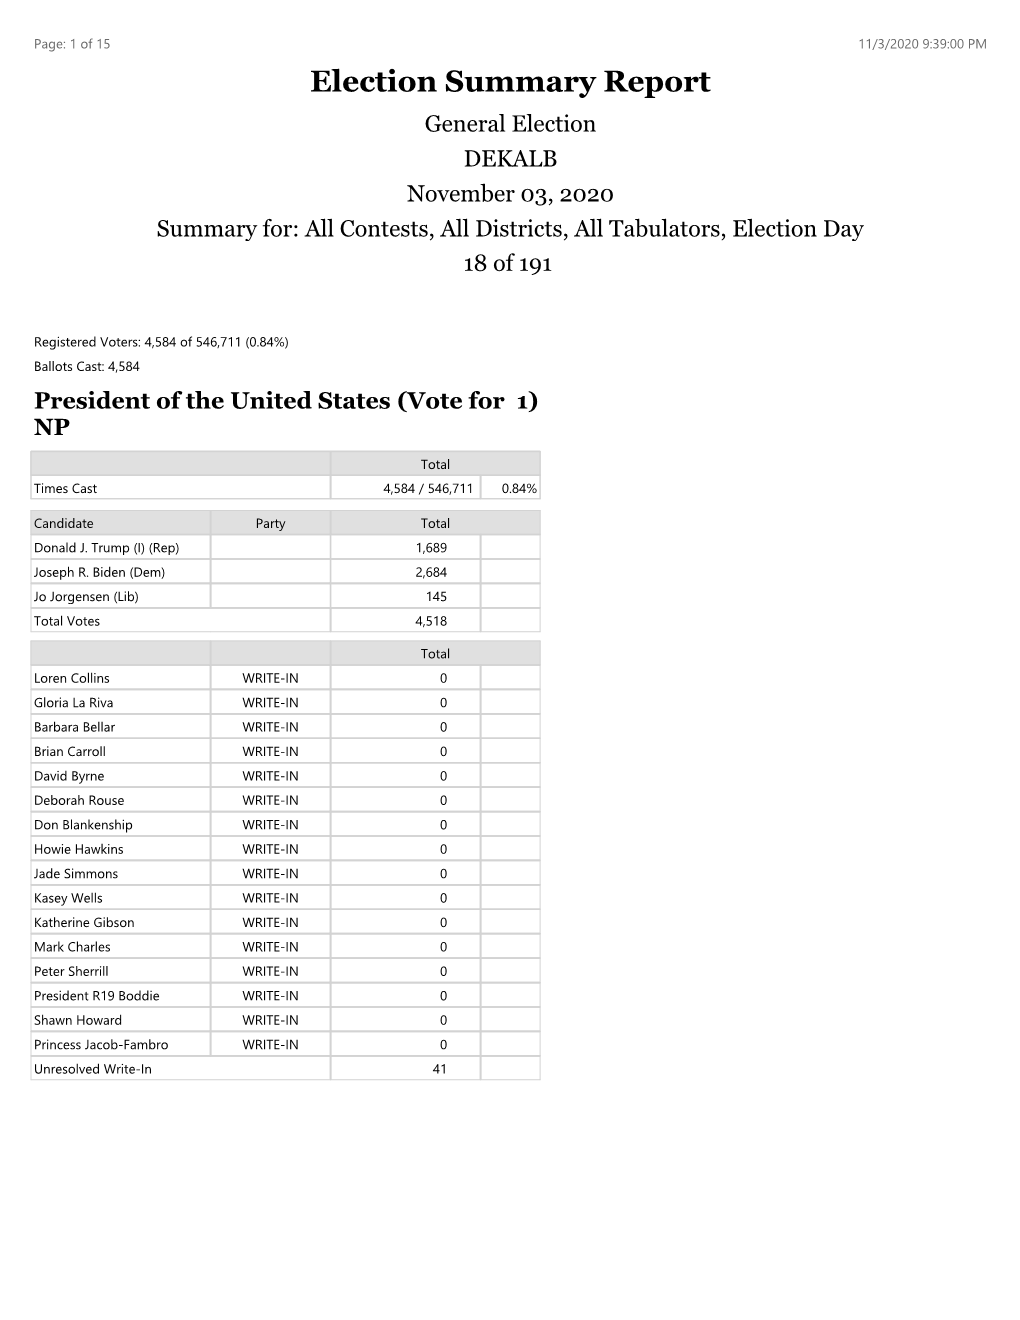 Election Summary Report General Election DEKALB November 03, 2020 Summary For: All Contests, All Districts, All Tabulators, Election Day 18 of 191